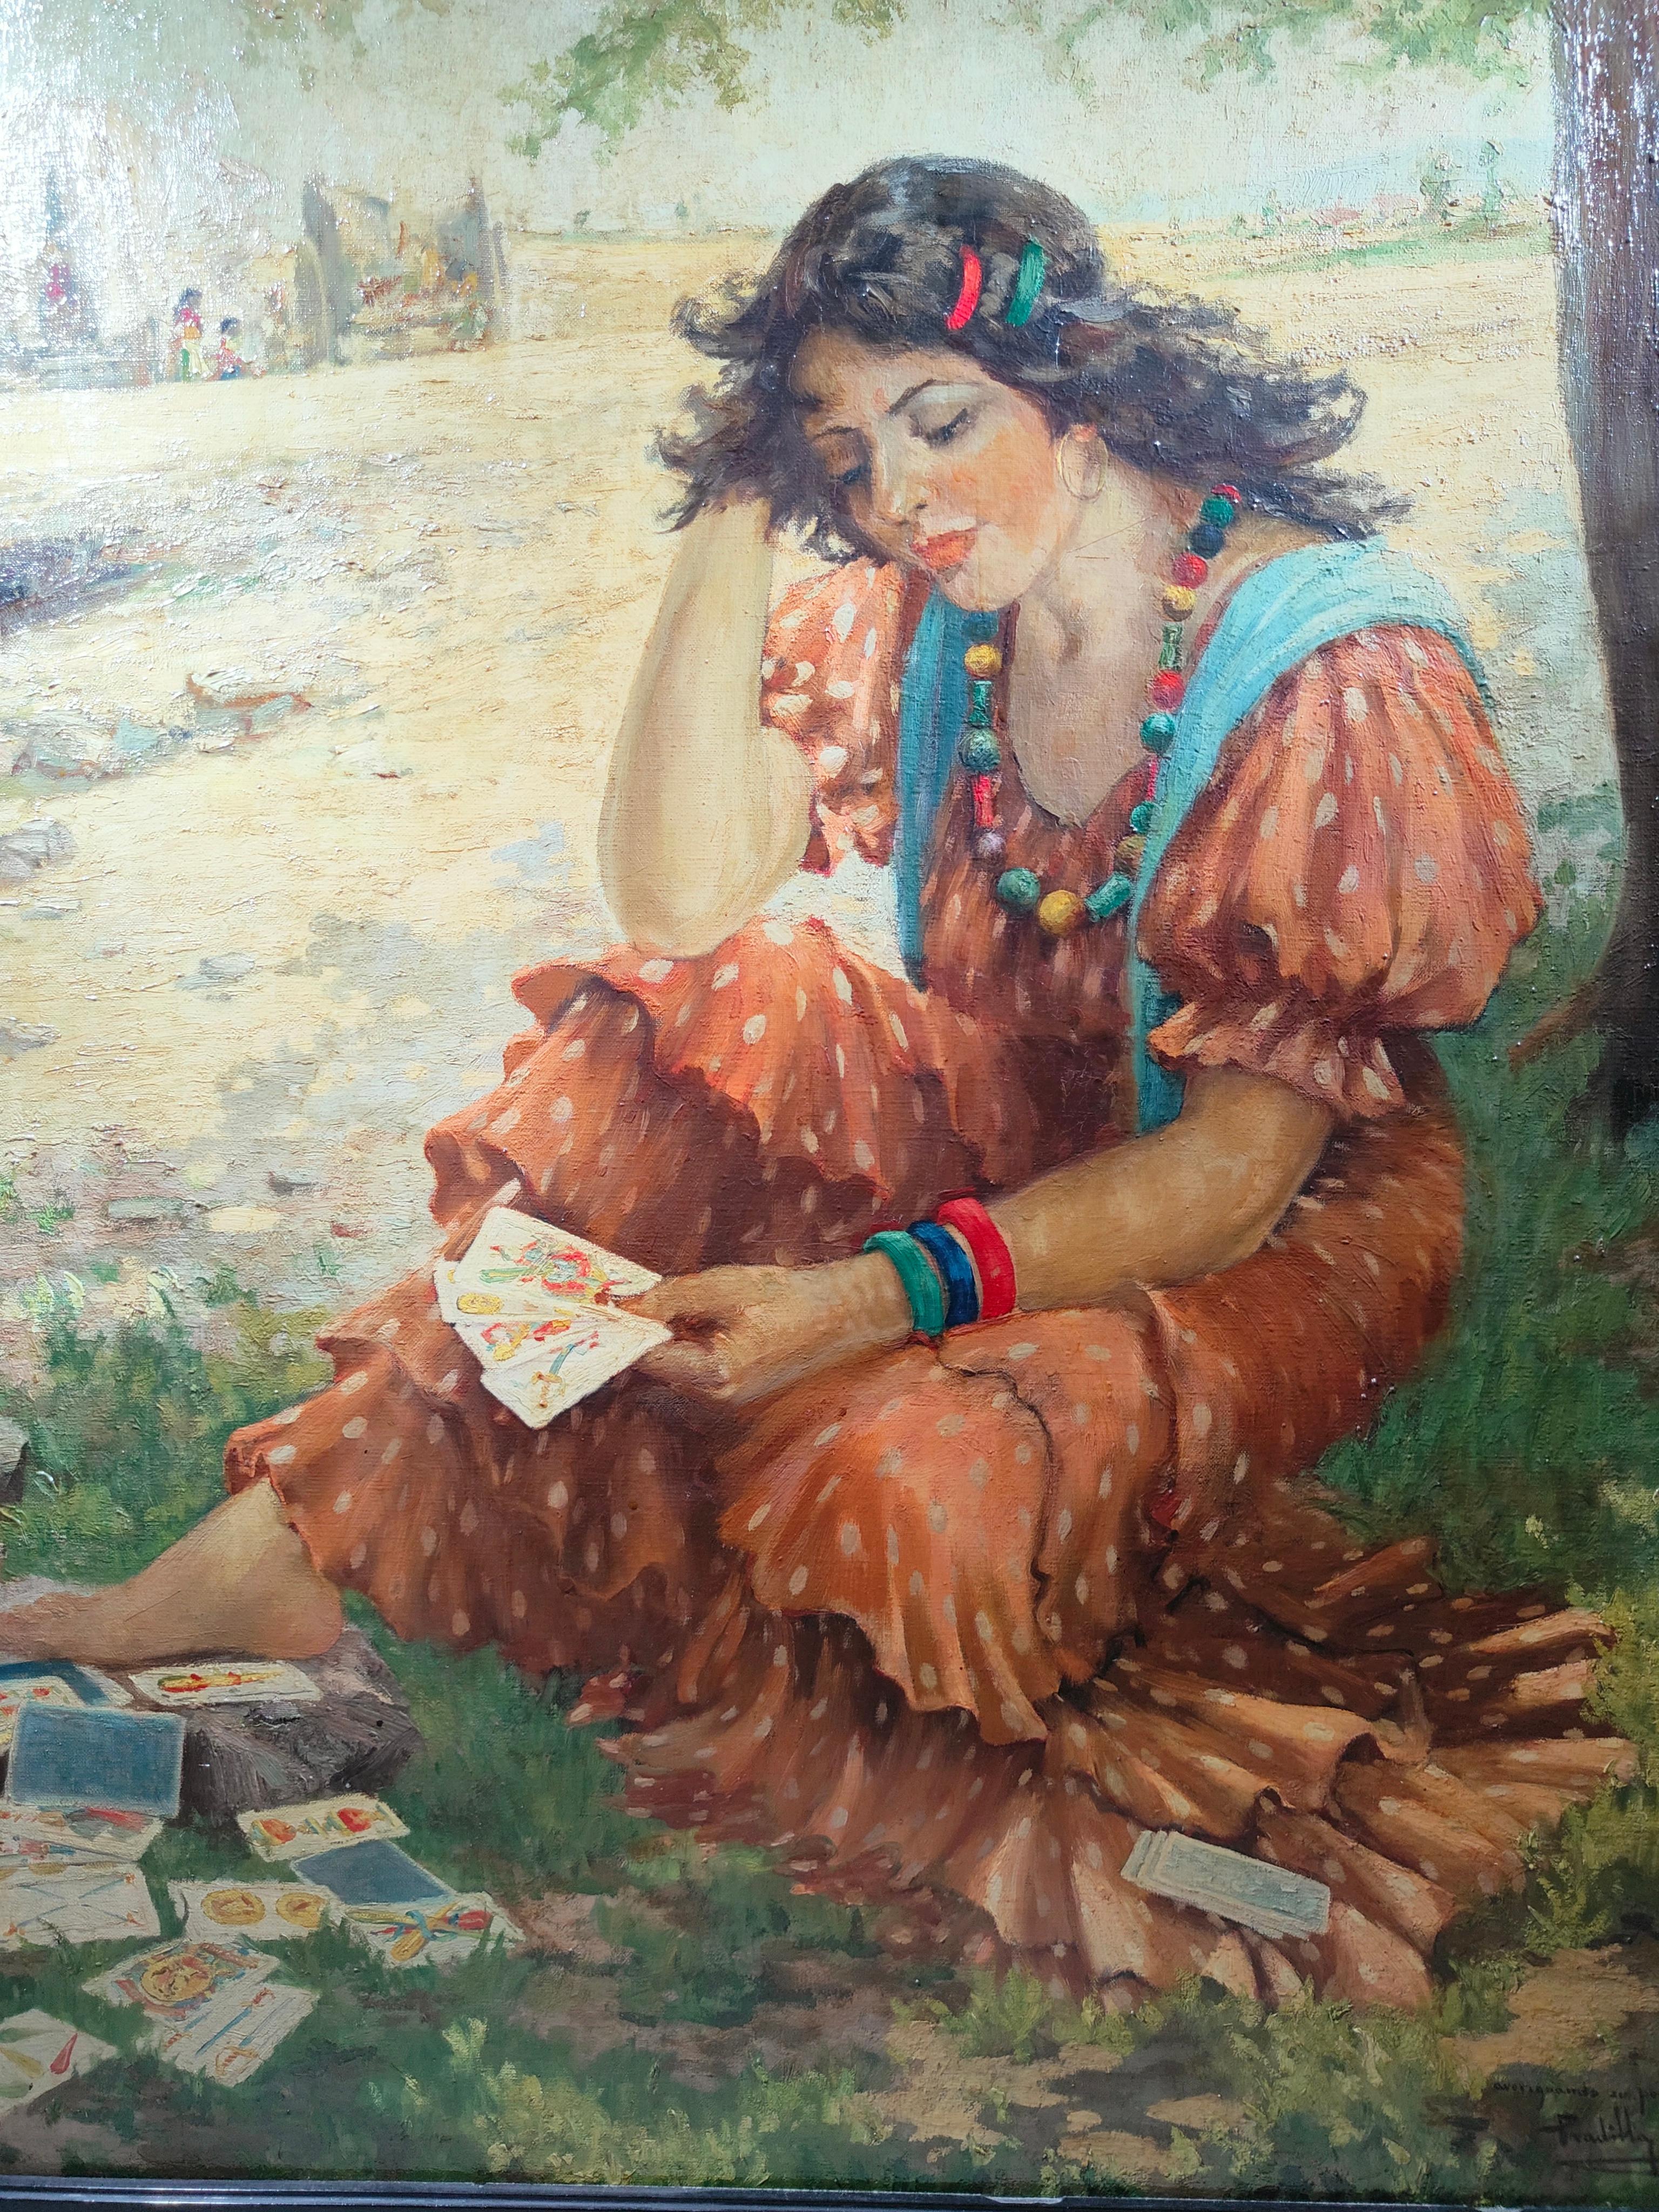 Large Oil On Canvas With Young Gypsy Fortune teller.
LARGE OIL ON CANVAS WITH YOUNG Gypsy guessing the future VERY INTERESTING OIL ON CANVAS REPRESENTING A YOUNG Gypsy guessing the FUTURE. IT IS SIGNED BY: PRADILLA AND TITLE: discovering the